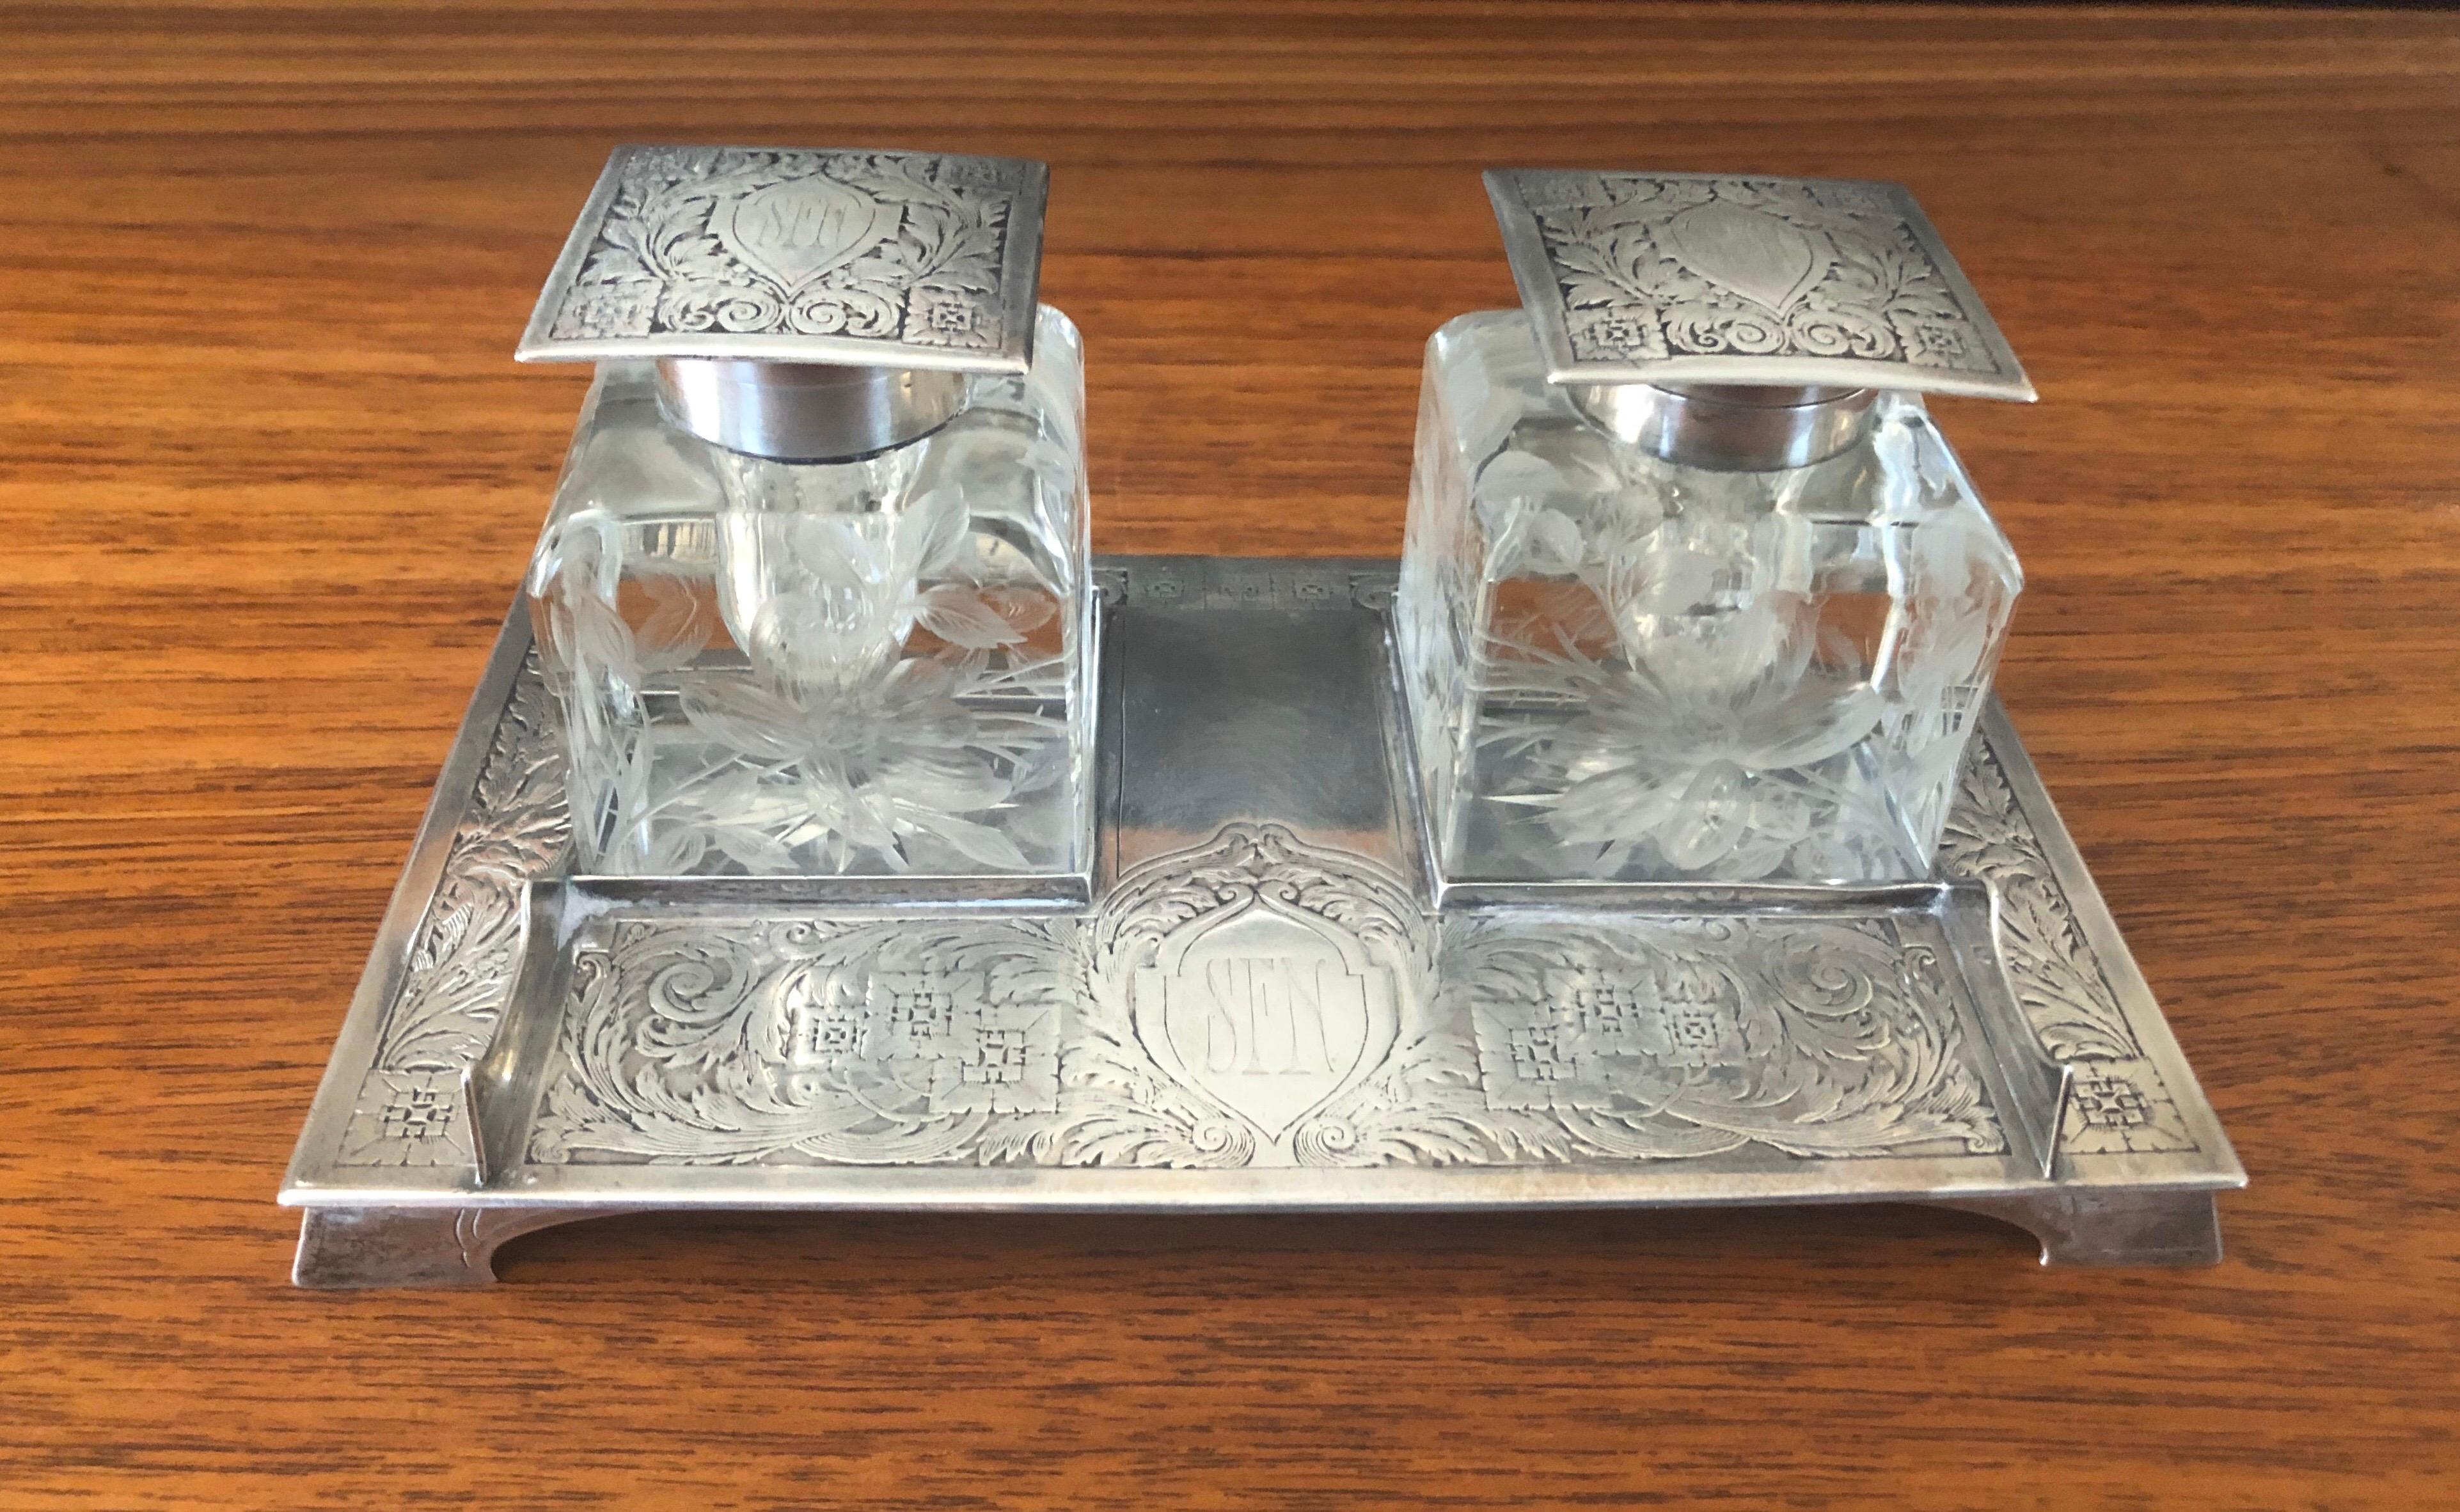 Antique Art Nouveau Double Inkwell on Sterling Silver Tray by J E Caldwell & Co. For Sale 6